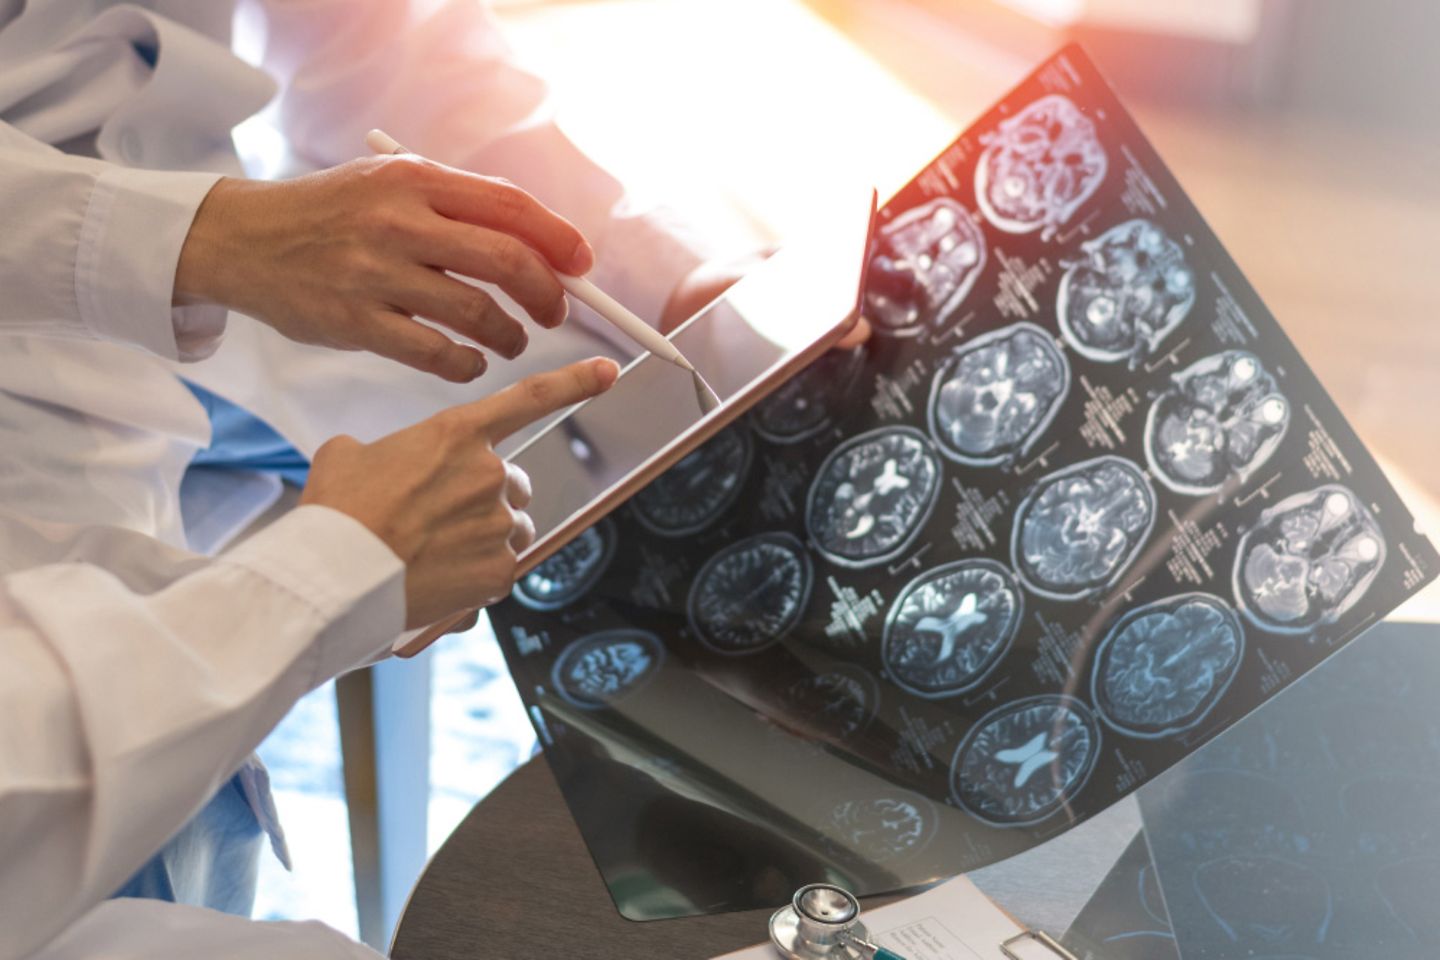 Doctors point to a tablet – holding MRI images.